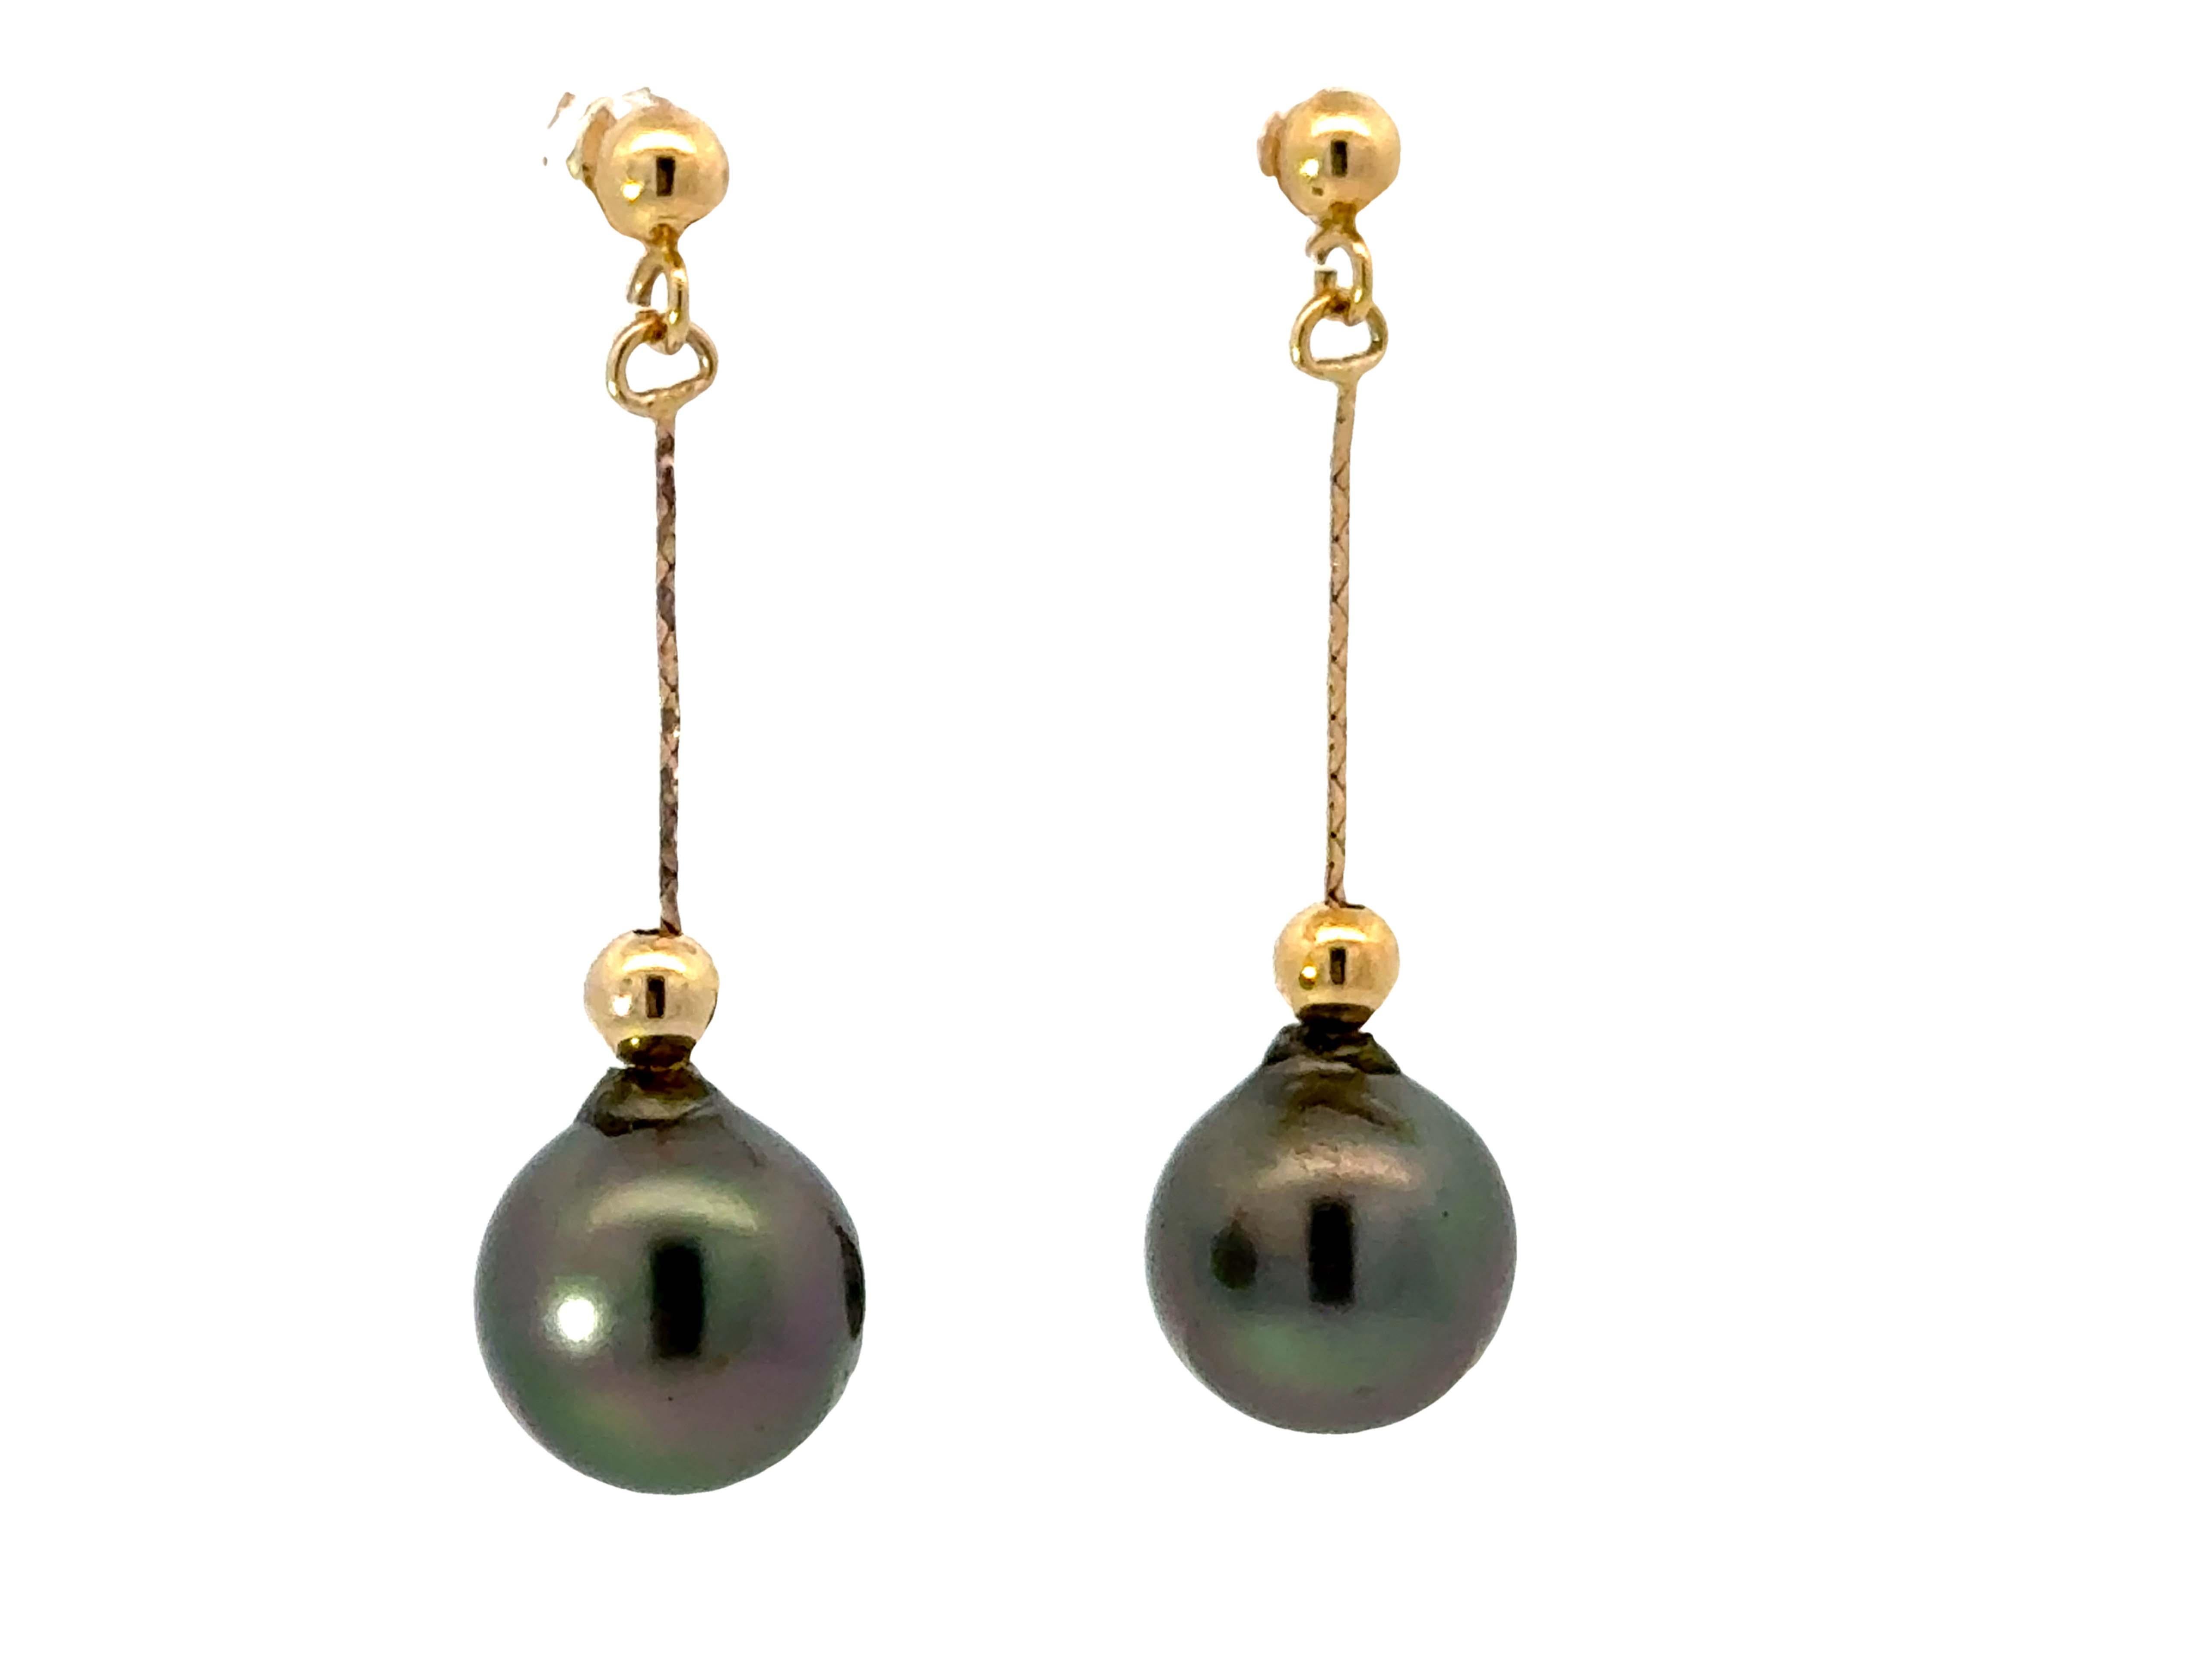 These stunning Tahitian pearls feature a peacock color with stunning blue green and purple hues.

Earrings Specifications:

Metal: 14k Yellow Gold

Earring Diameter: 1.00